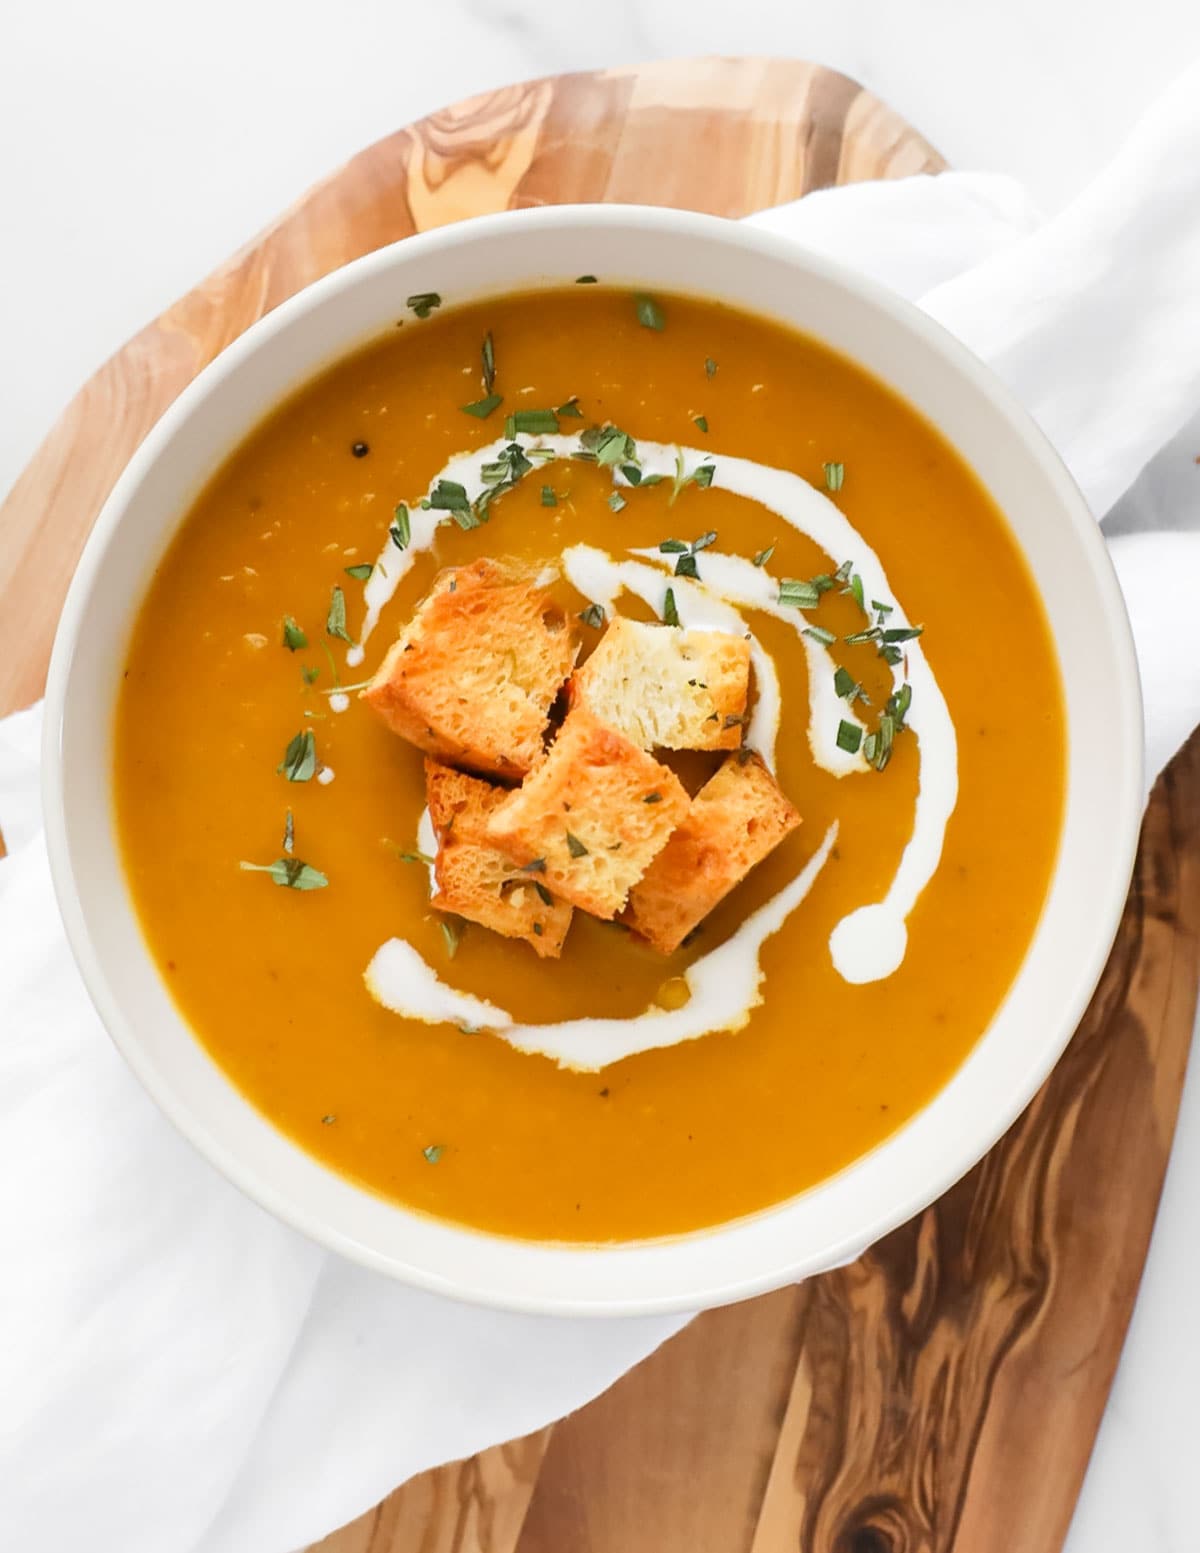 A white bowl filled with creamy orange soup with a drizzle of coconut milk on top along with five croutons, and chopped green herbs.